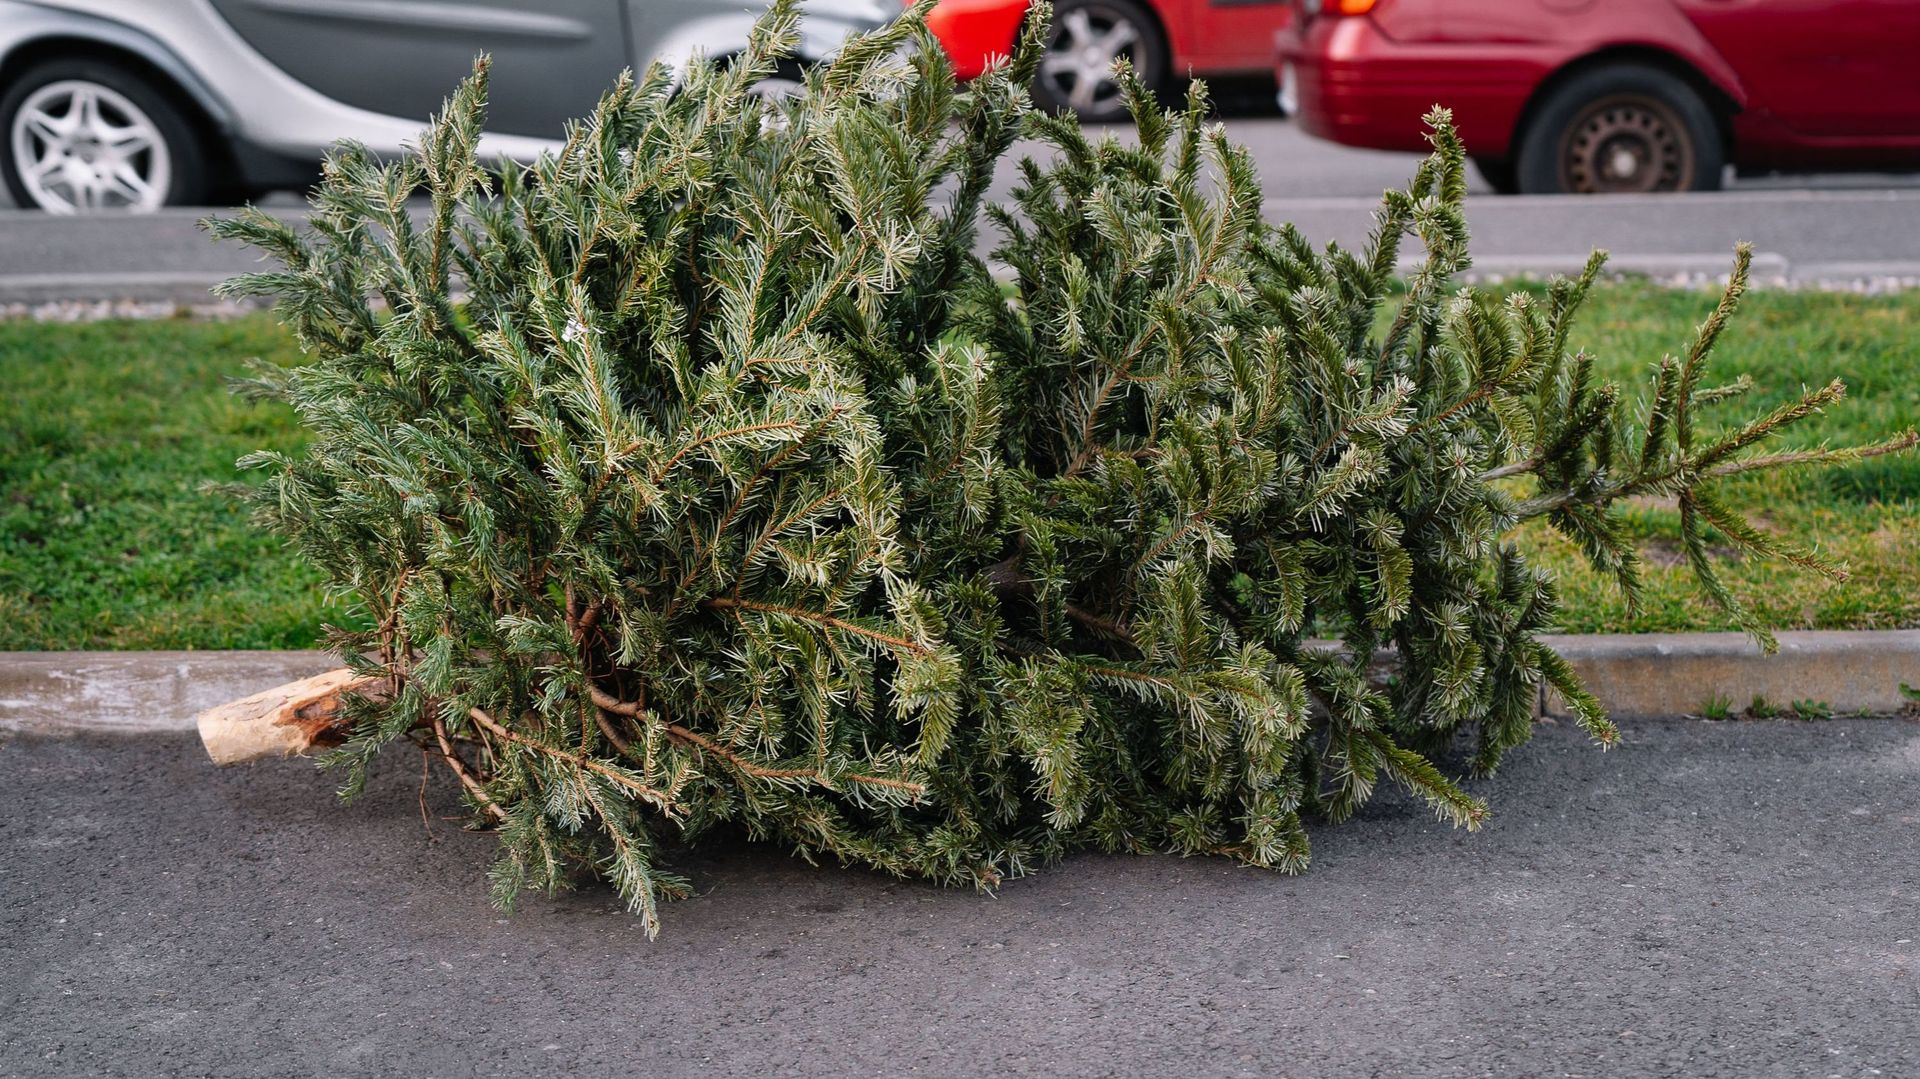 View Of Abandoned Christmas Tree On Street In City